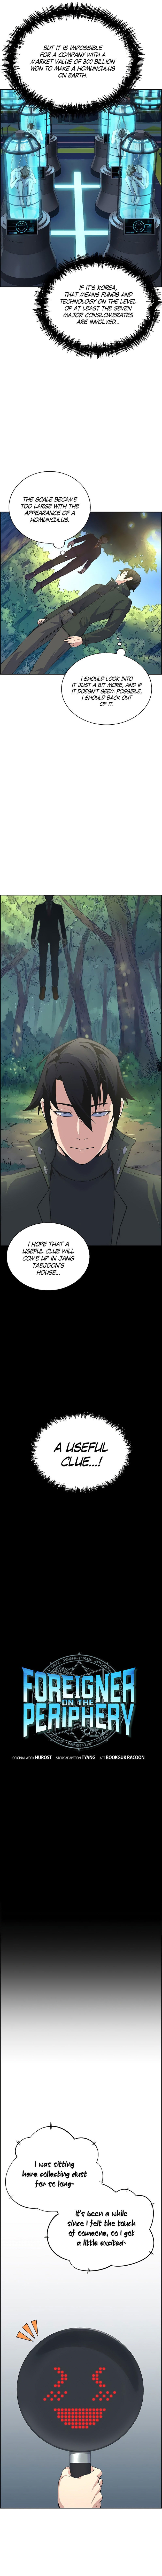 foreigner-on-the-periphery-chap-4-2